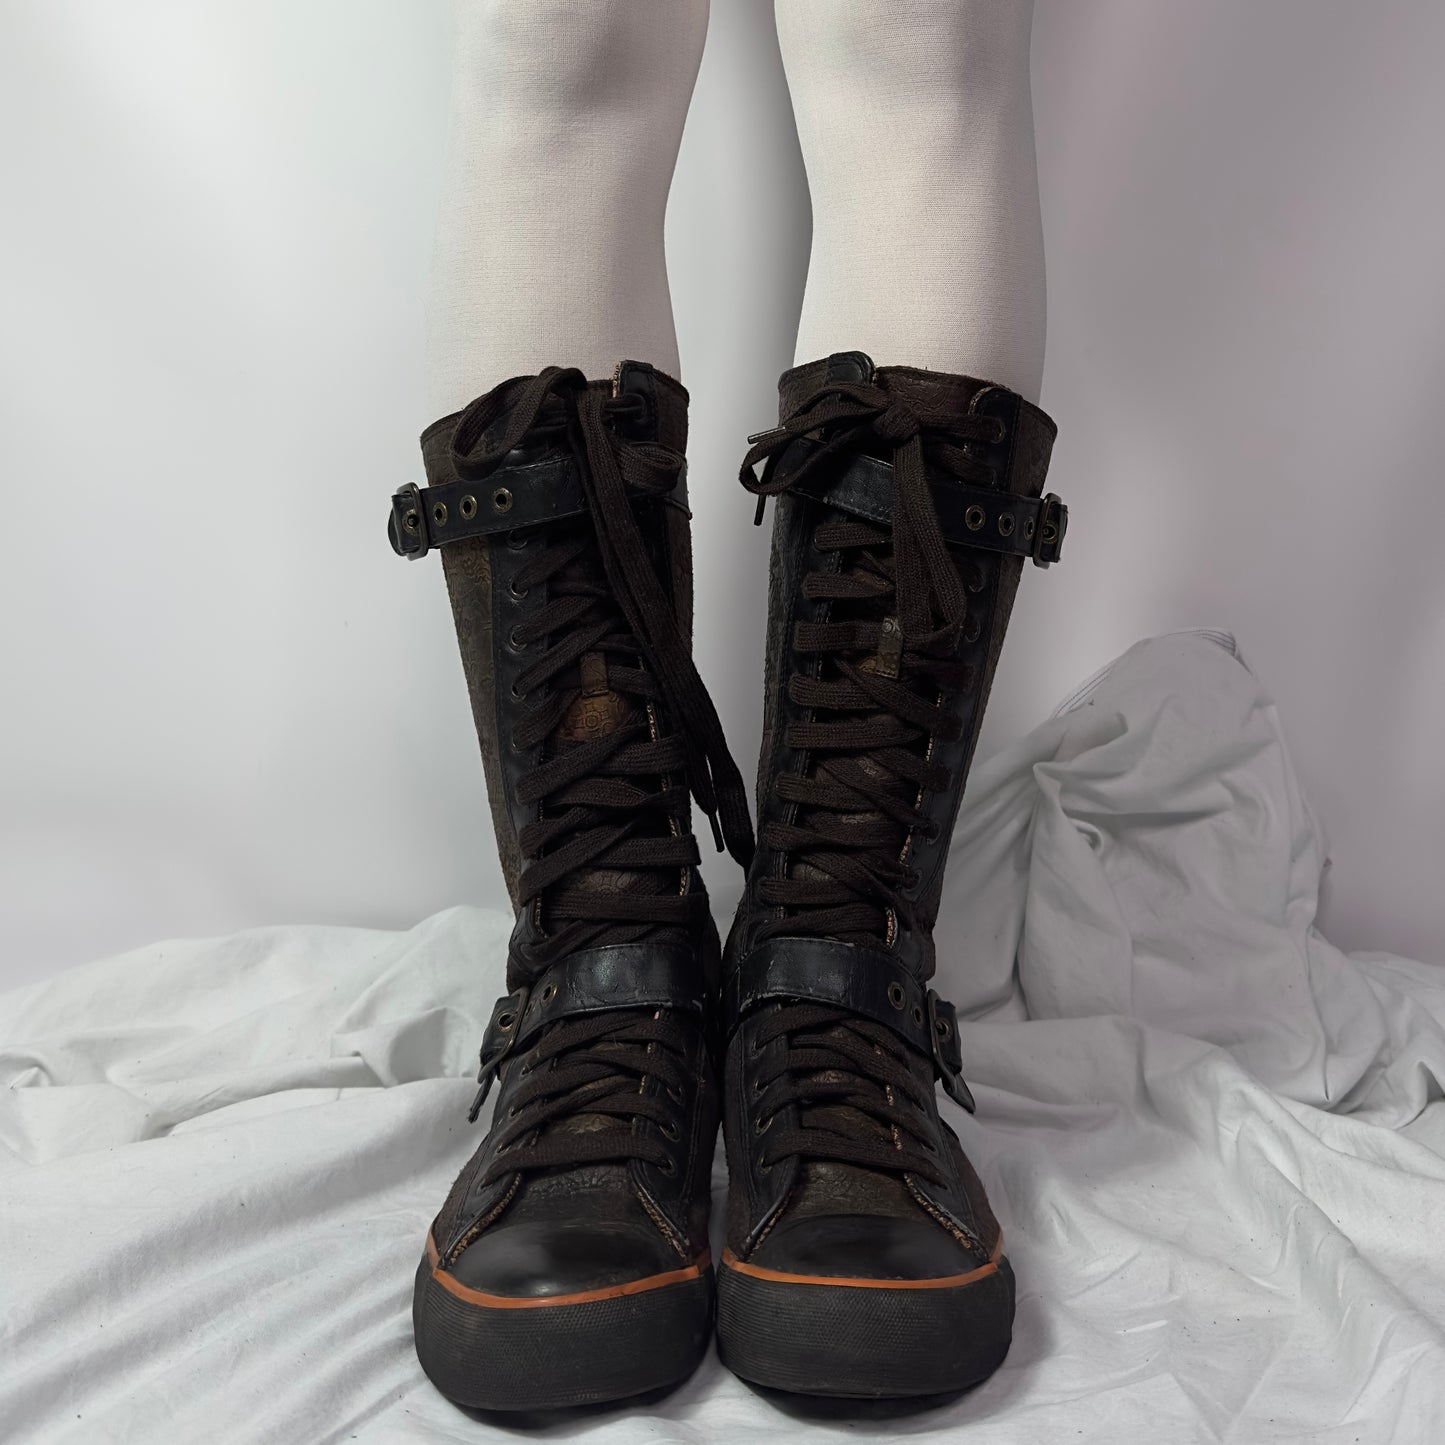 Vintage Lace Up Boxing Boots / converse style